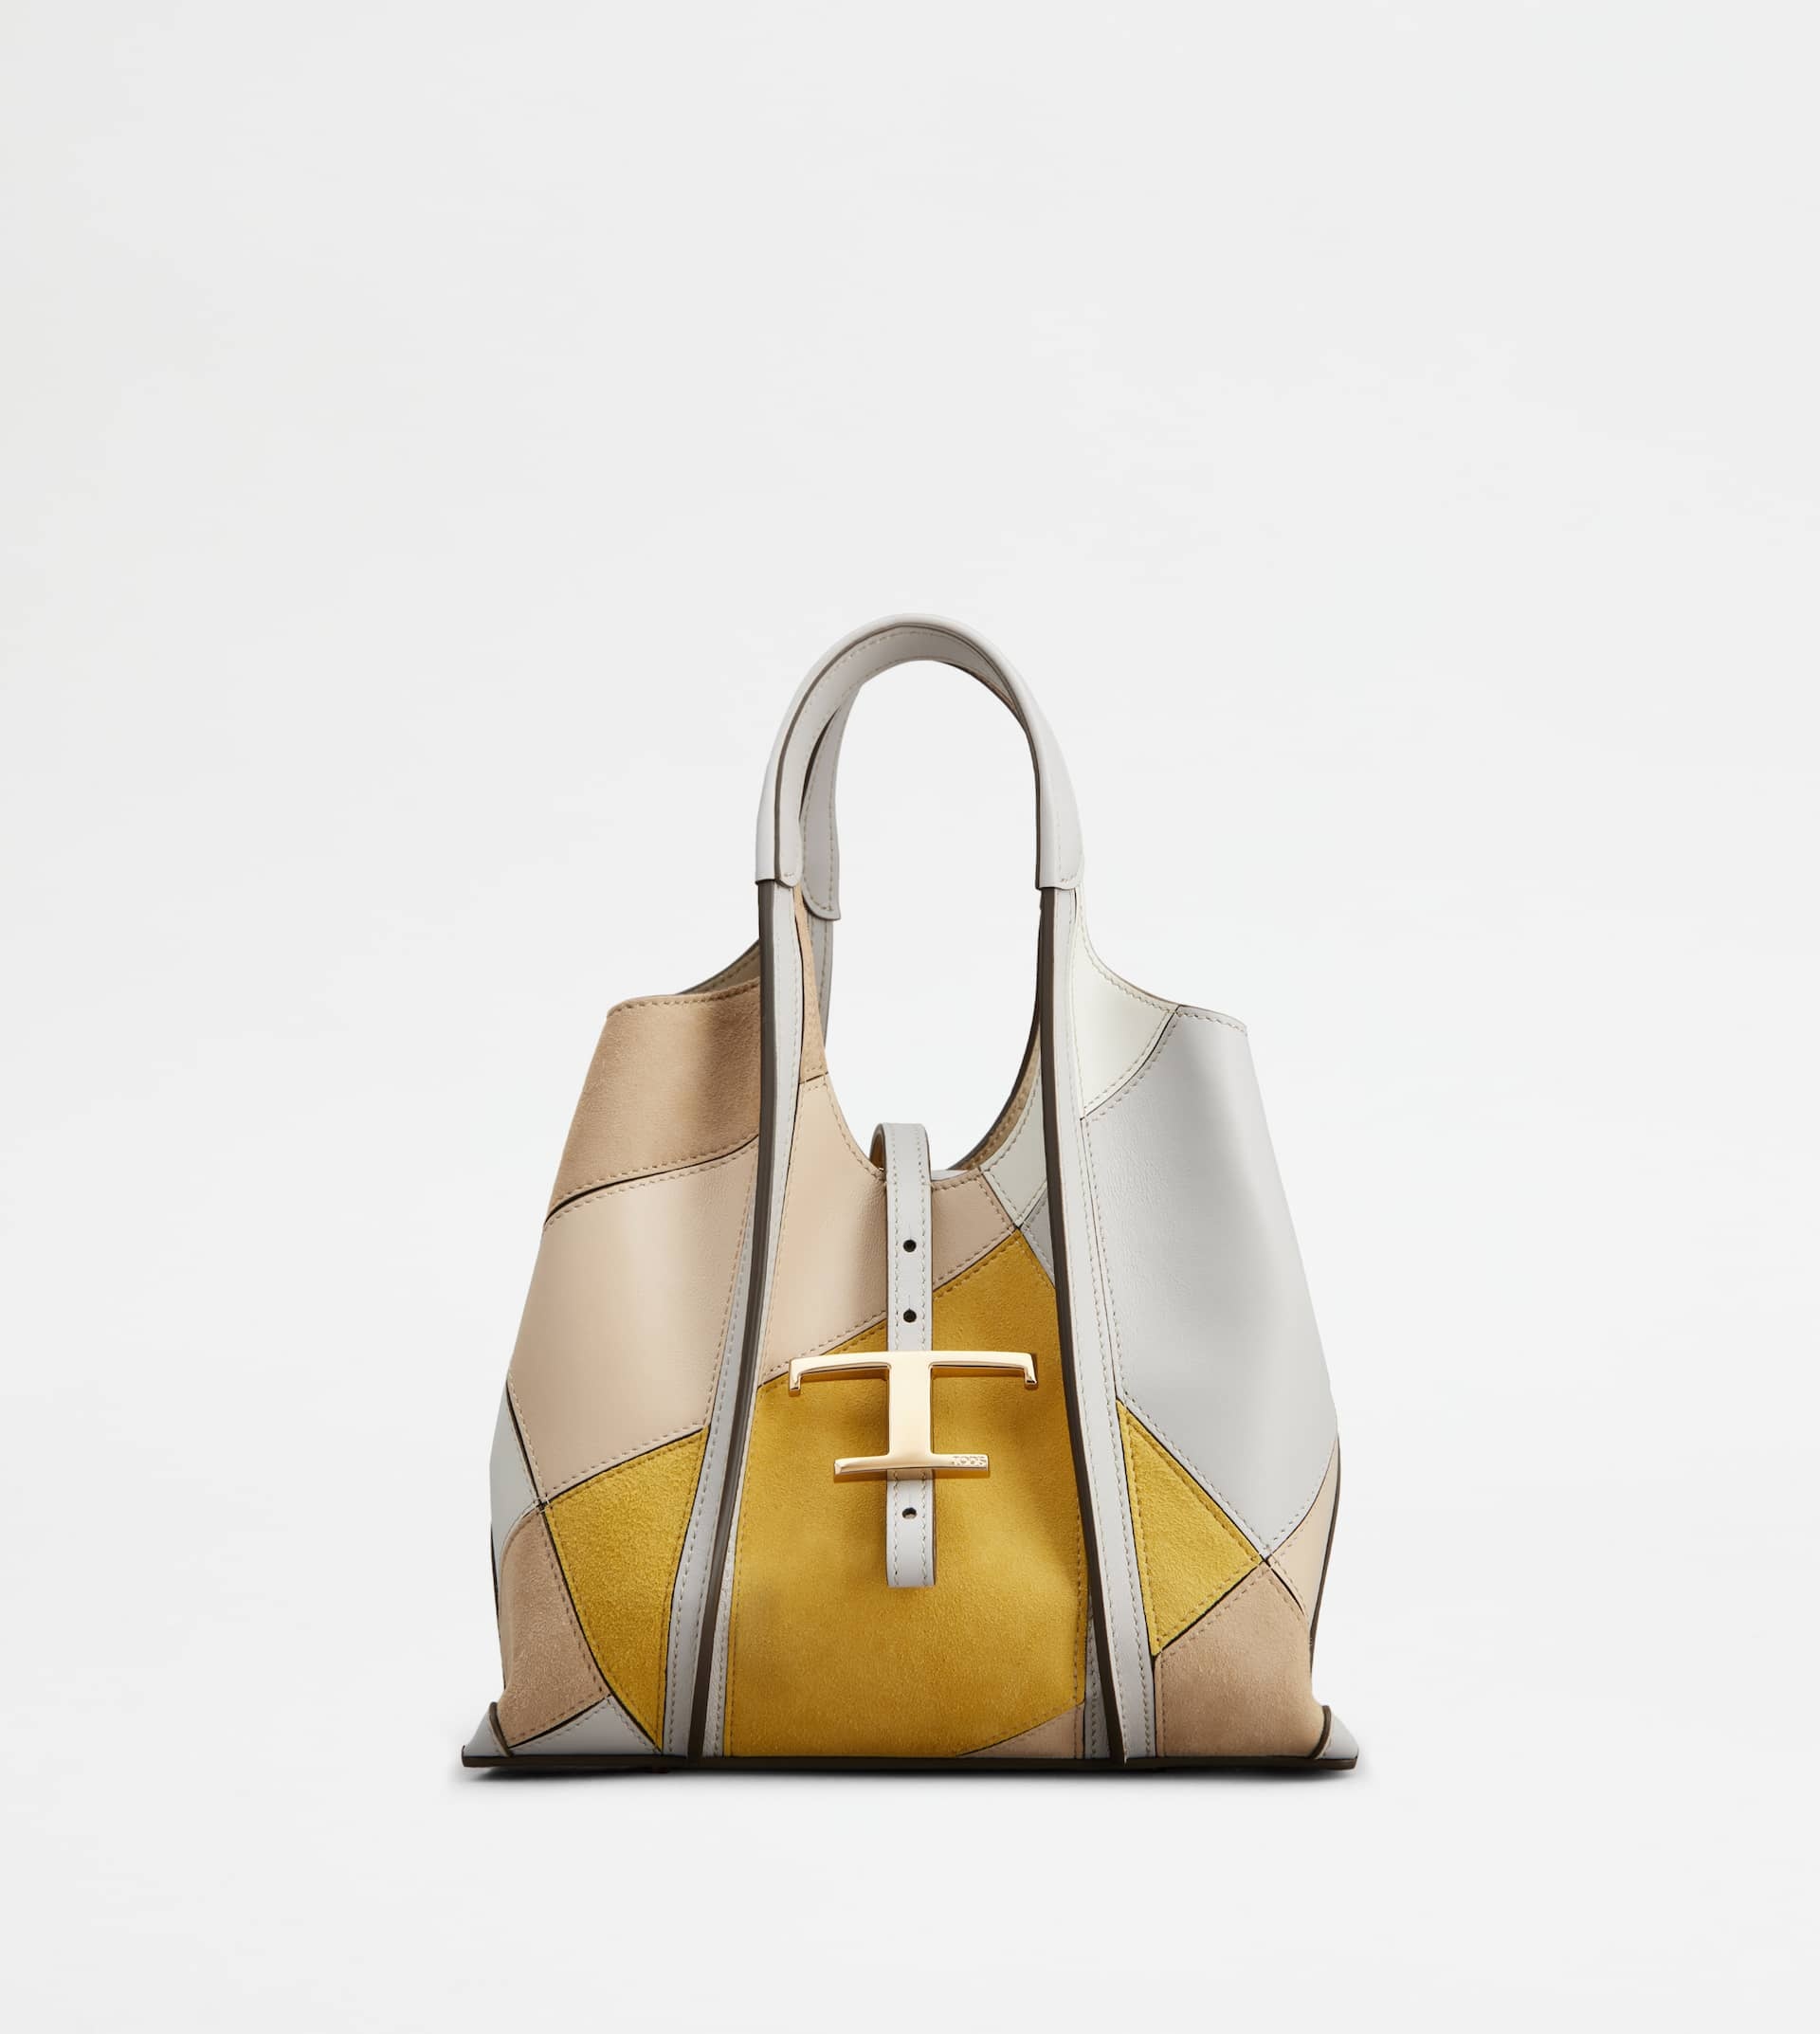 T TIMELESS SHOPPING BAG IN LEATHER MINI - BEIGE, YELLOW, GREY - 1